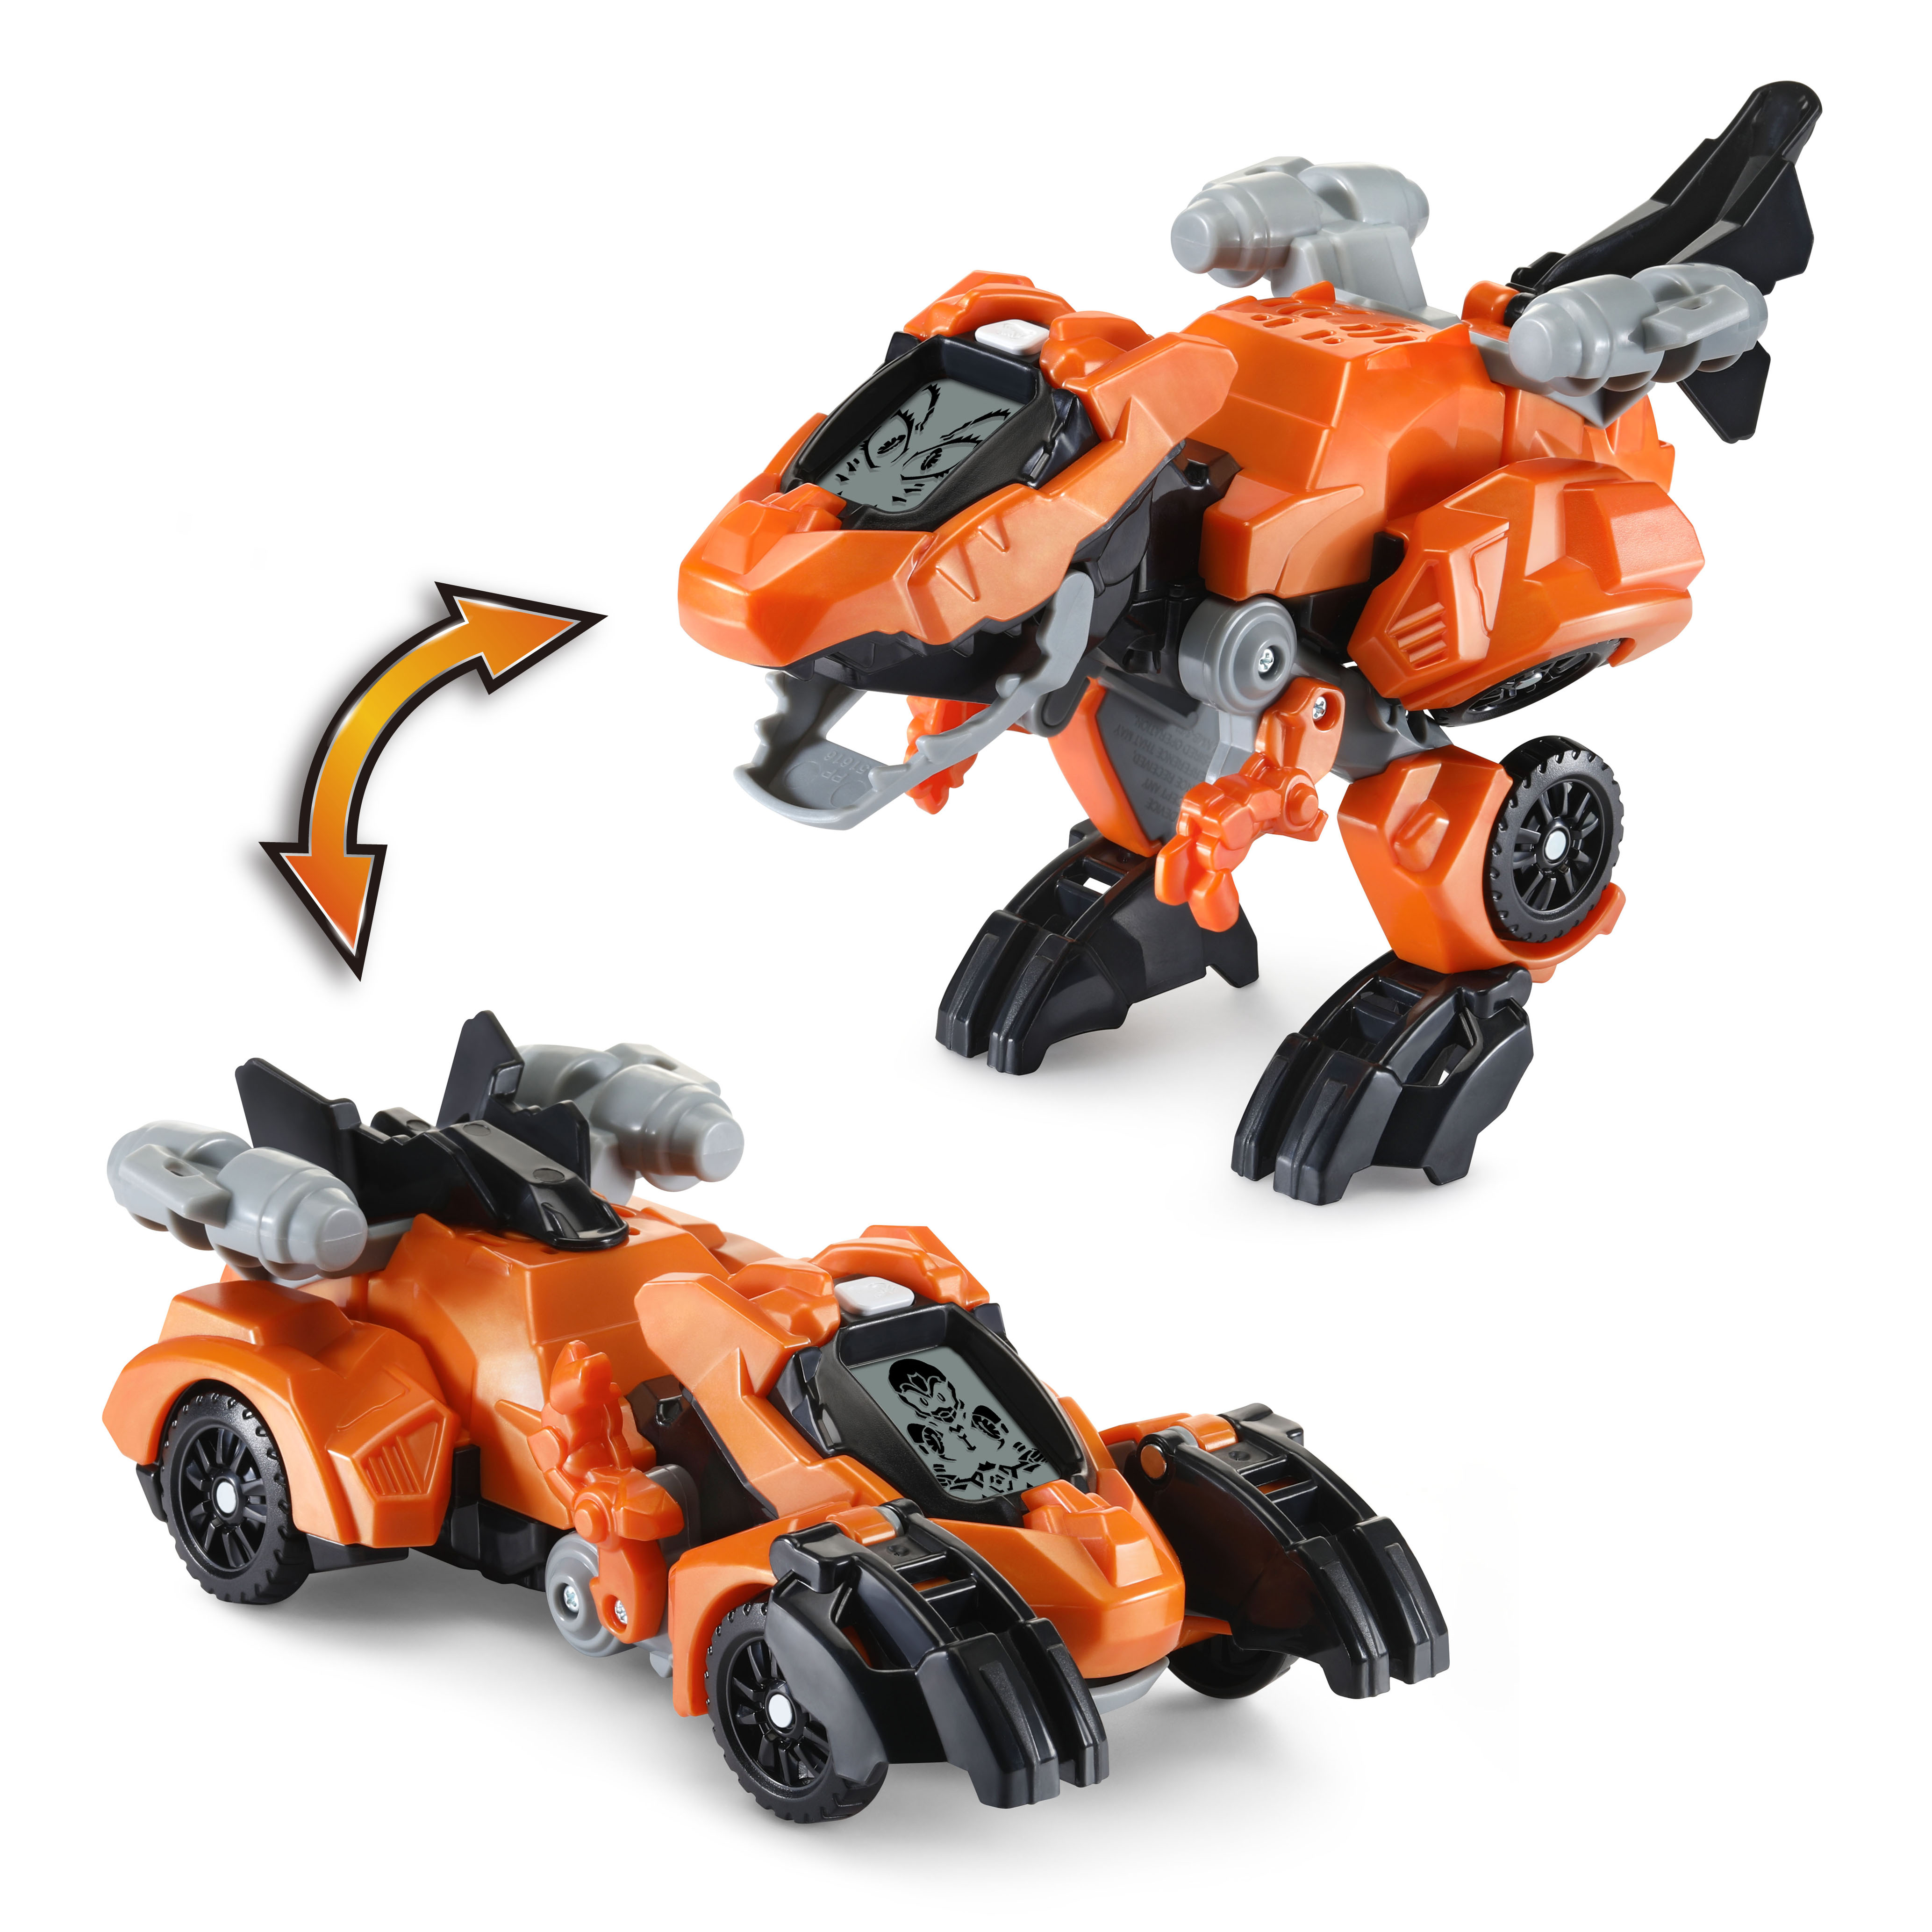 Transform the dino easily into a fast Race Car.